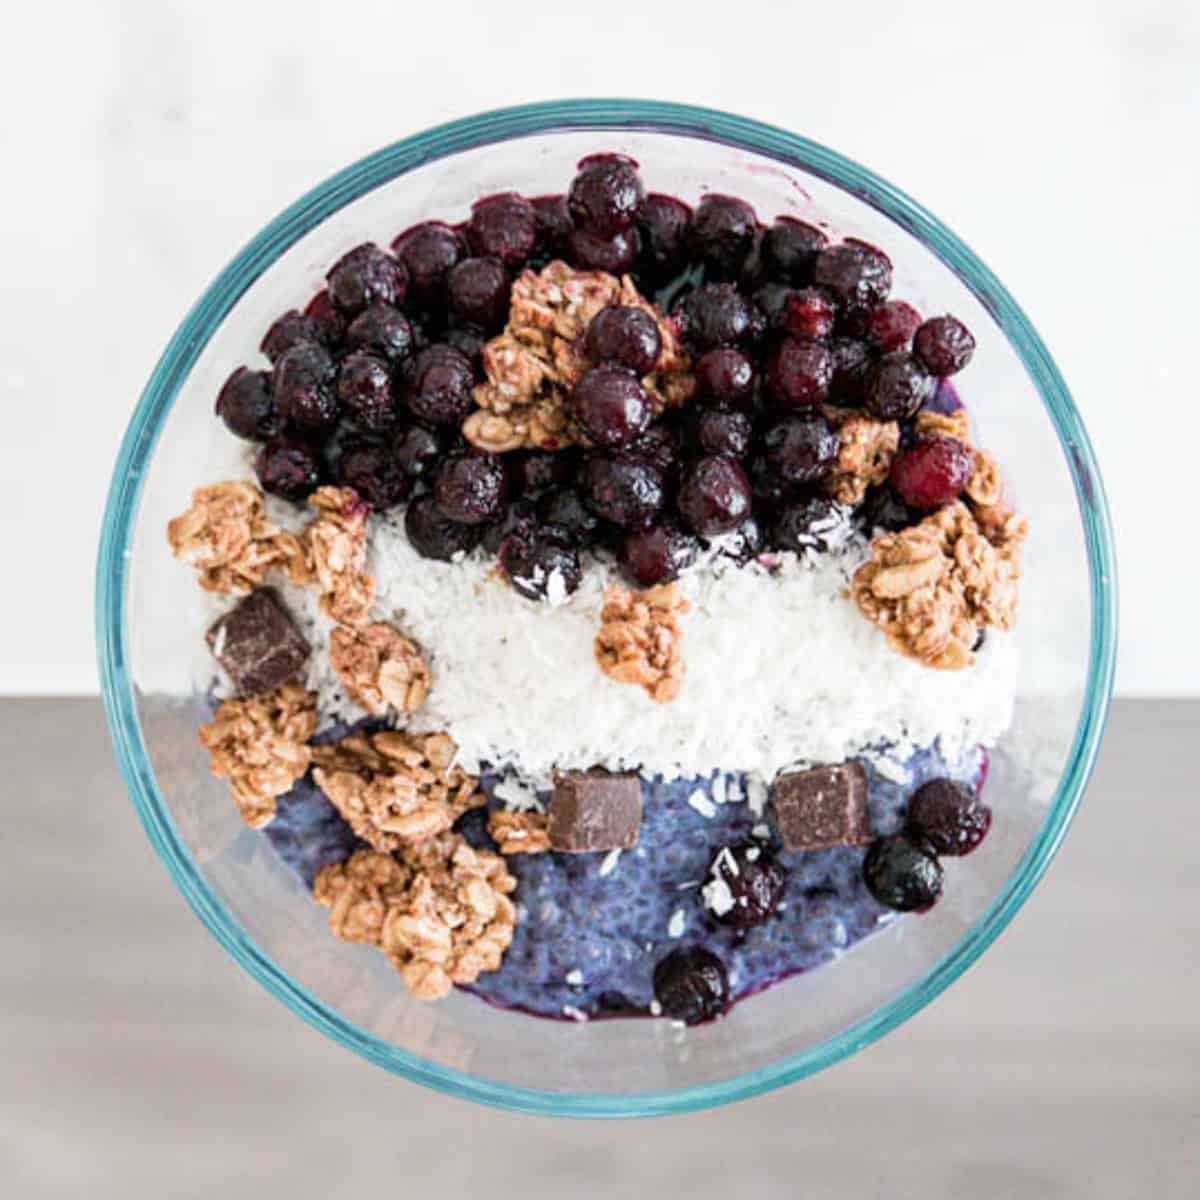 https://www.nomss.com/wp-content/uploads/2022/07/vegan-blueberry-chia-seeds-pudding-with-oat-milk-nomss-sq-1.jpg